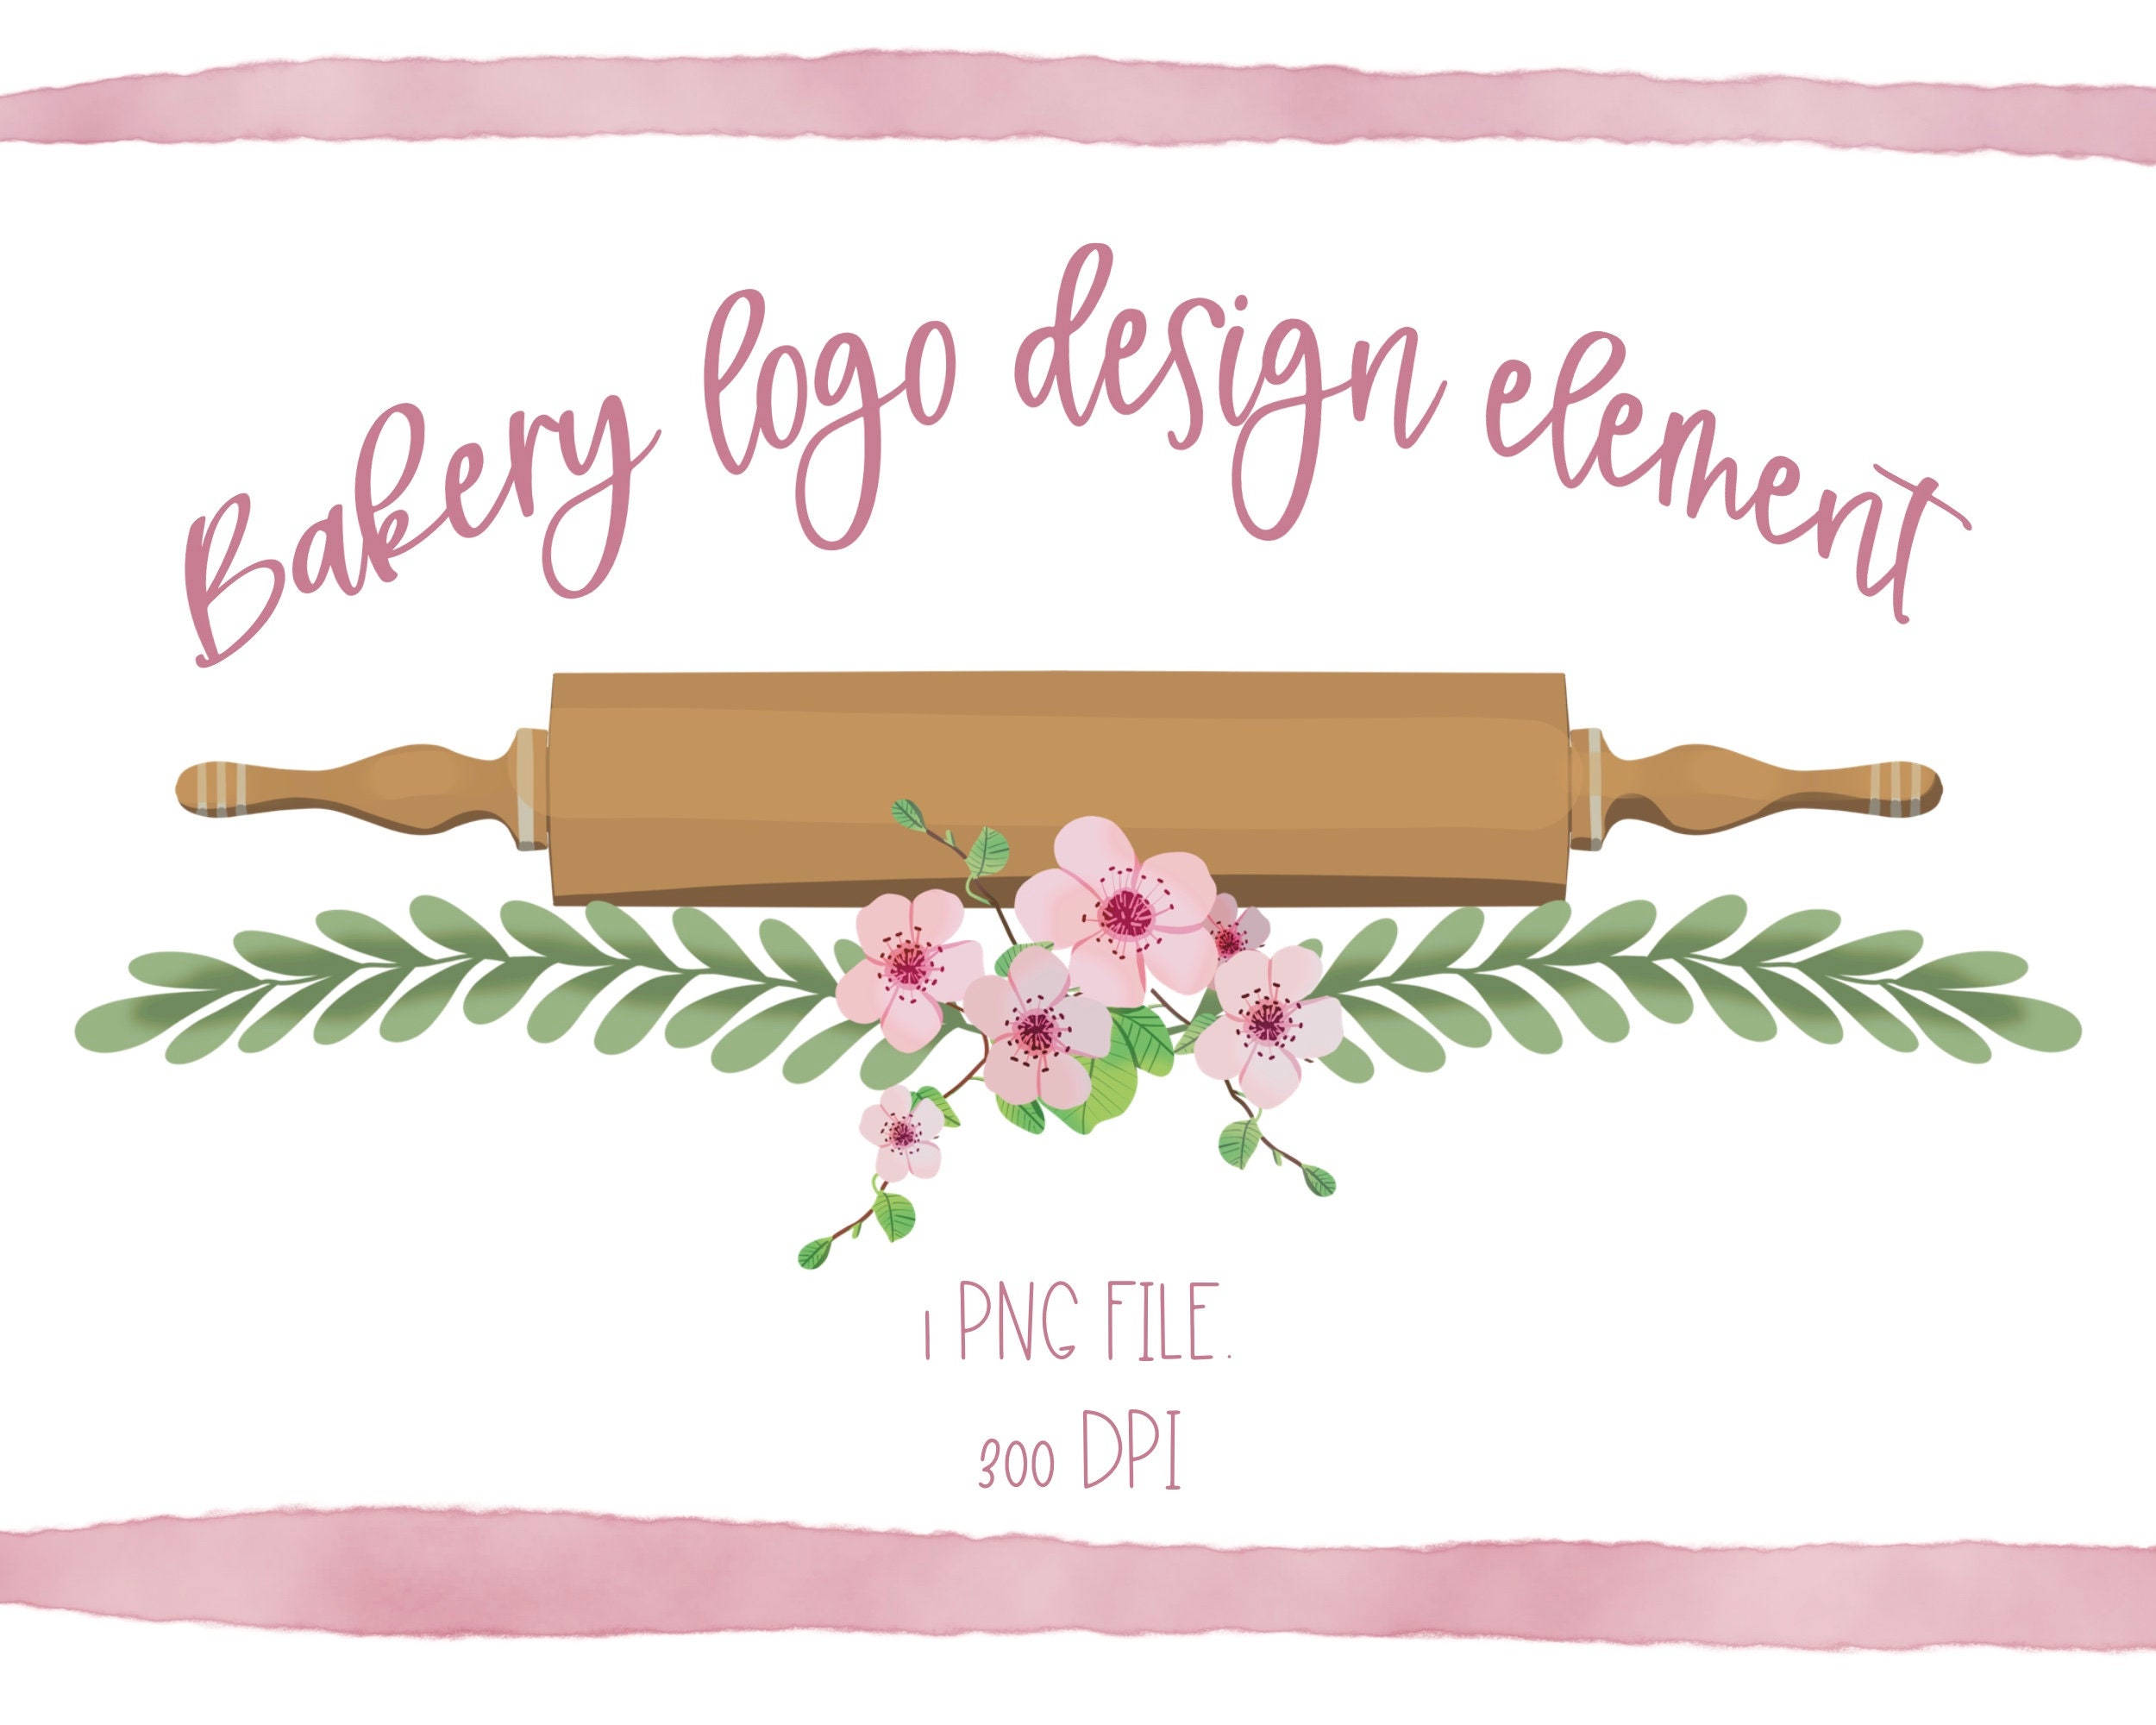 Kitchenaid Mixer Sublimation, Bakery Png File, Floral Bakery Logo Design,  Baking Clipart With Flowers, Pink Kitchen Printable Art (Download Now) 